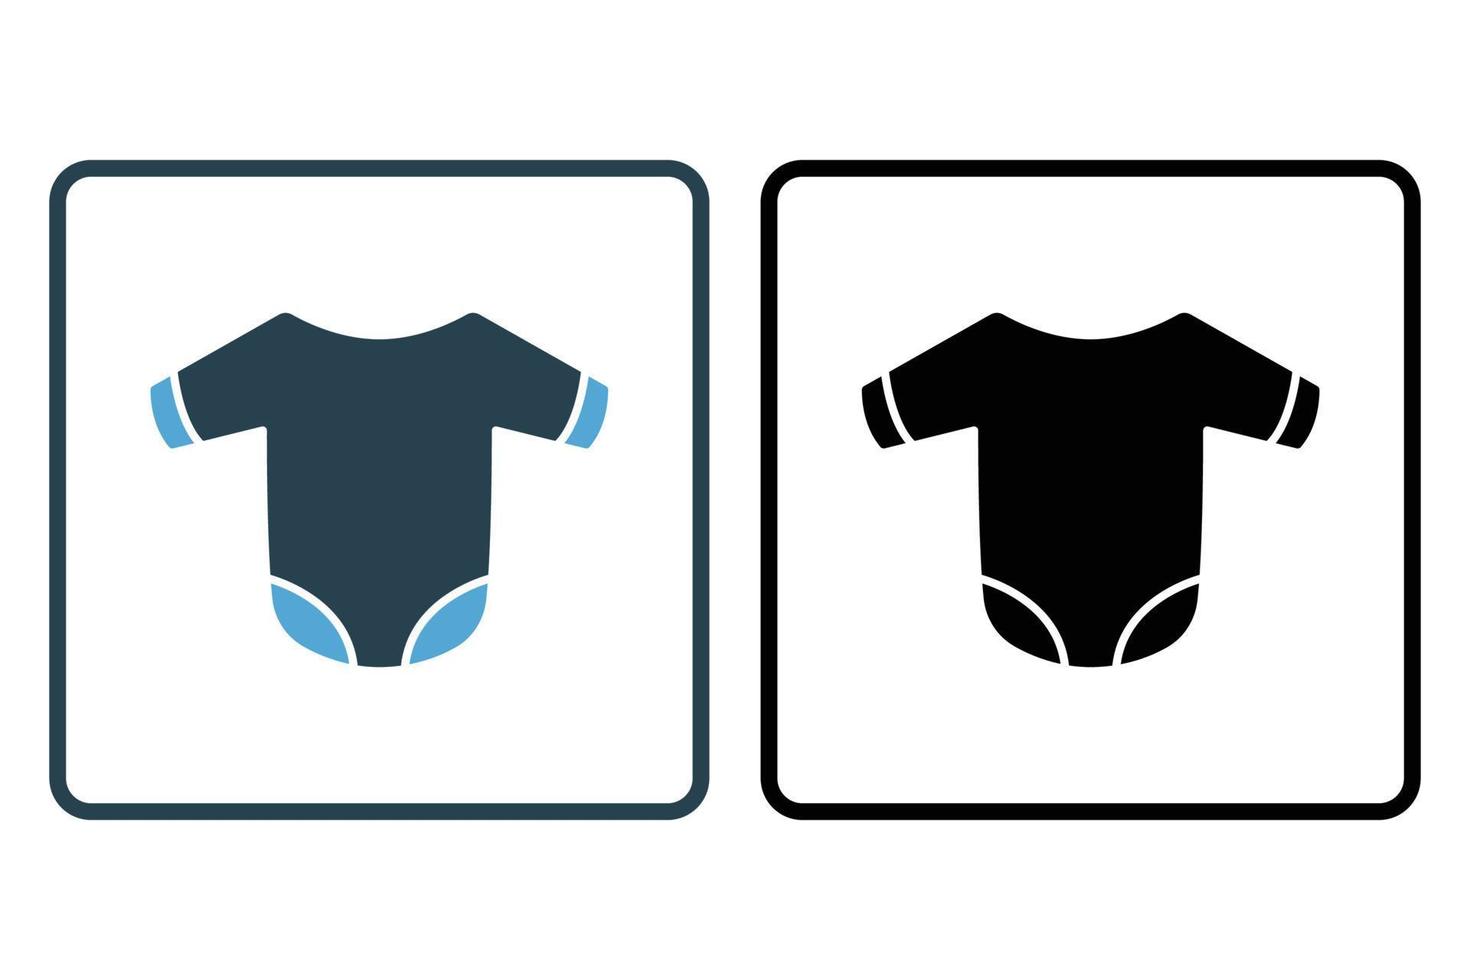 Baby clothes icon illustration. icon related to baby care. Solid icon style. Simple vector design editable